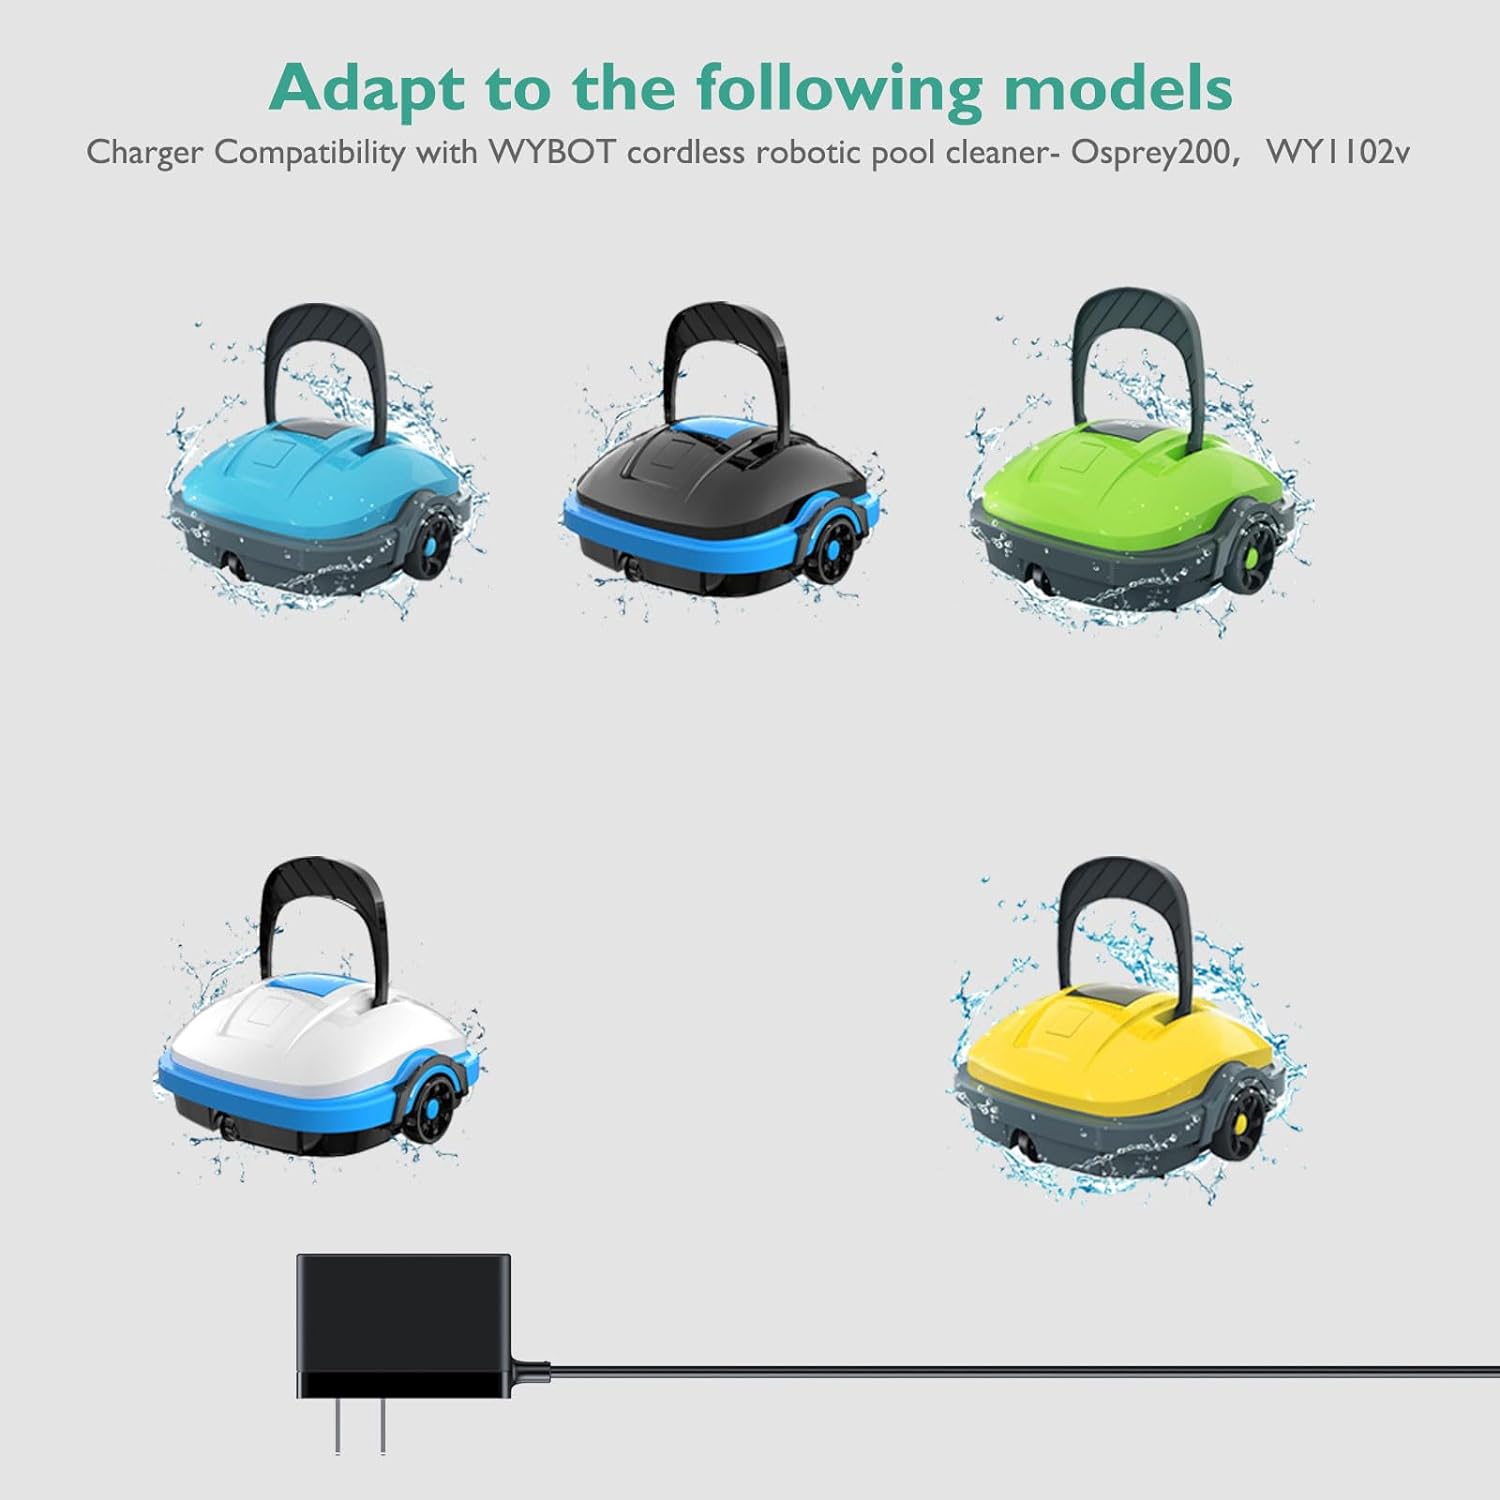 Charger Compatibility with Wybot Osprey 200 Robot Pool Cleaner Replacement WY1102 Cordless Robotic Pool Vacuum Power AC/